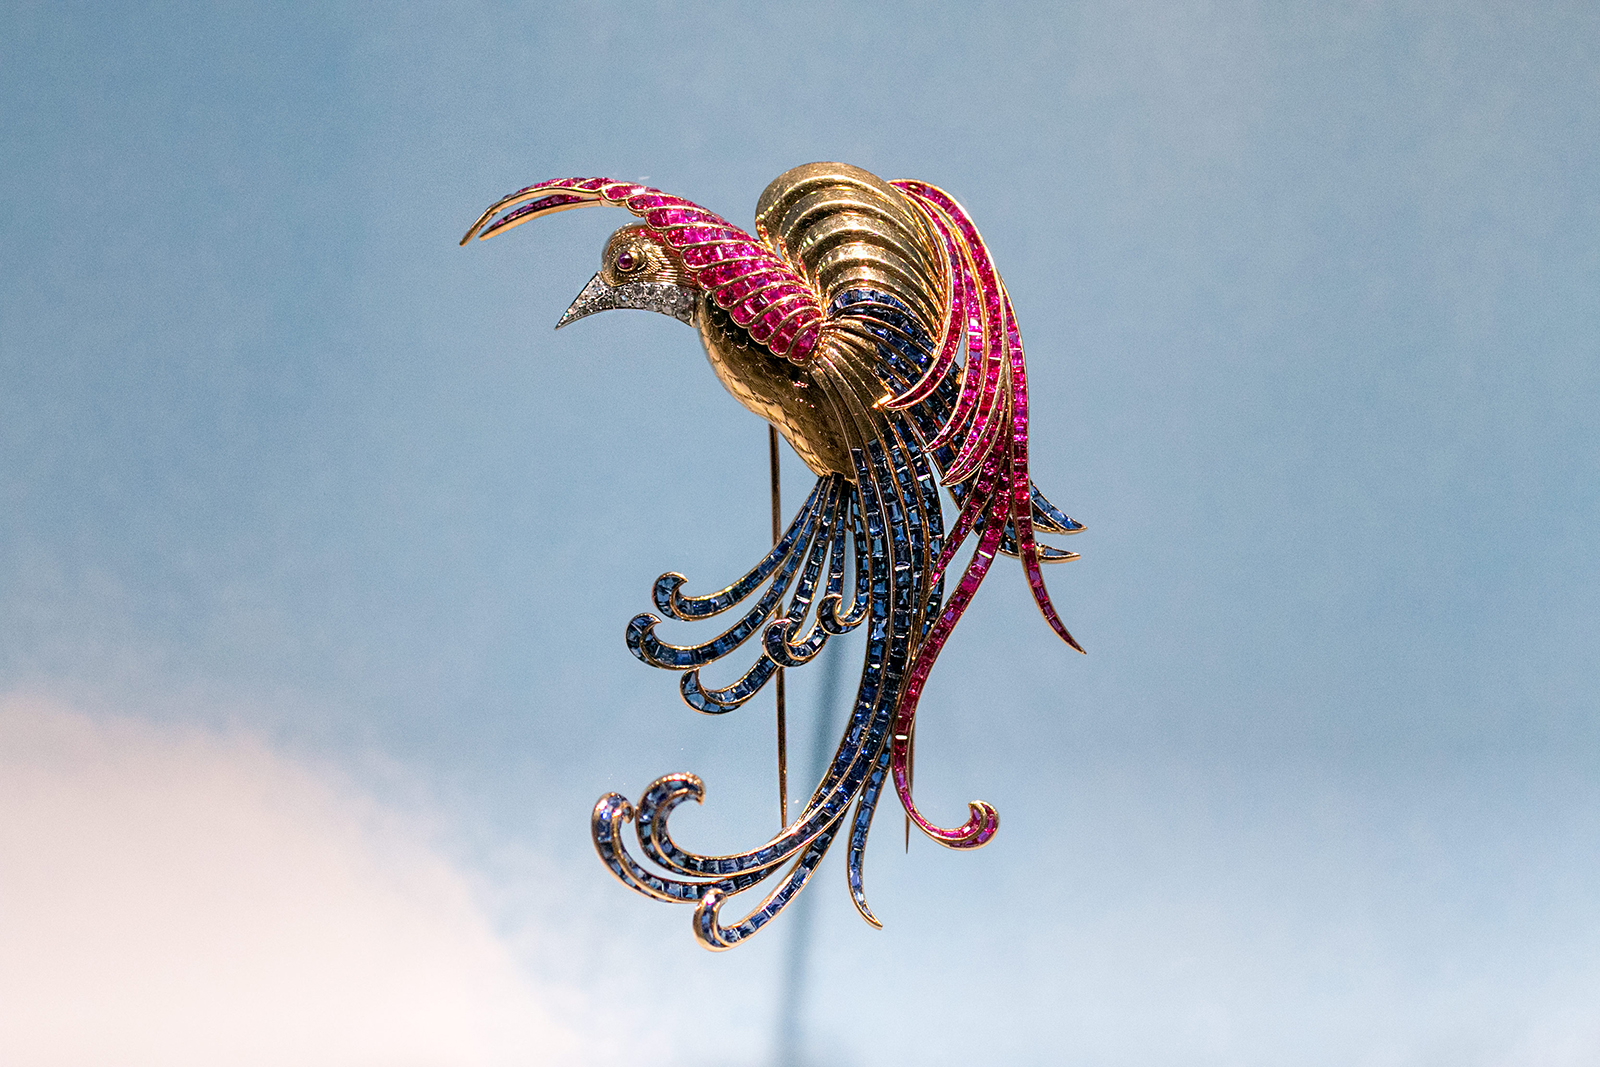 Van Cleef & Arpels 'Bird of Paradise' brooch with rubies, sapphires and diamonds in yellow gold and platinum from 1942